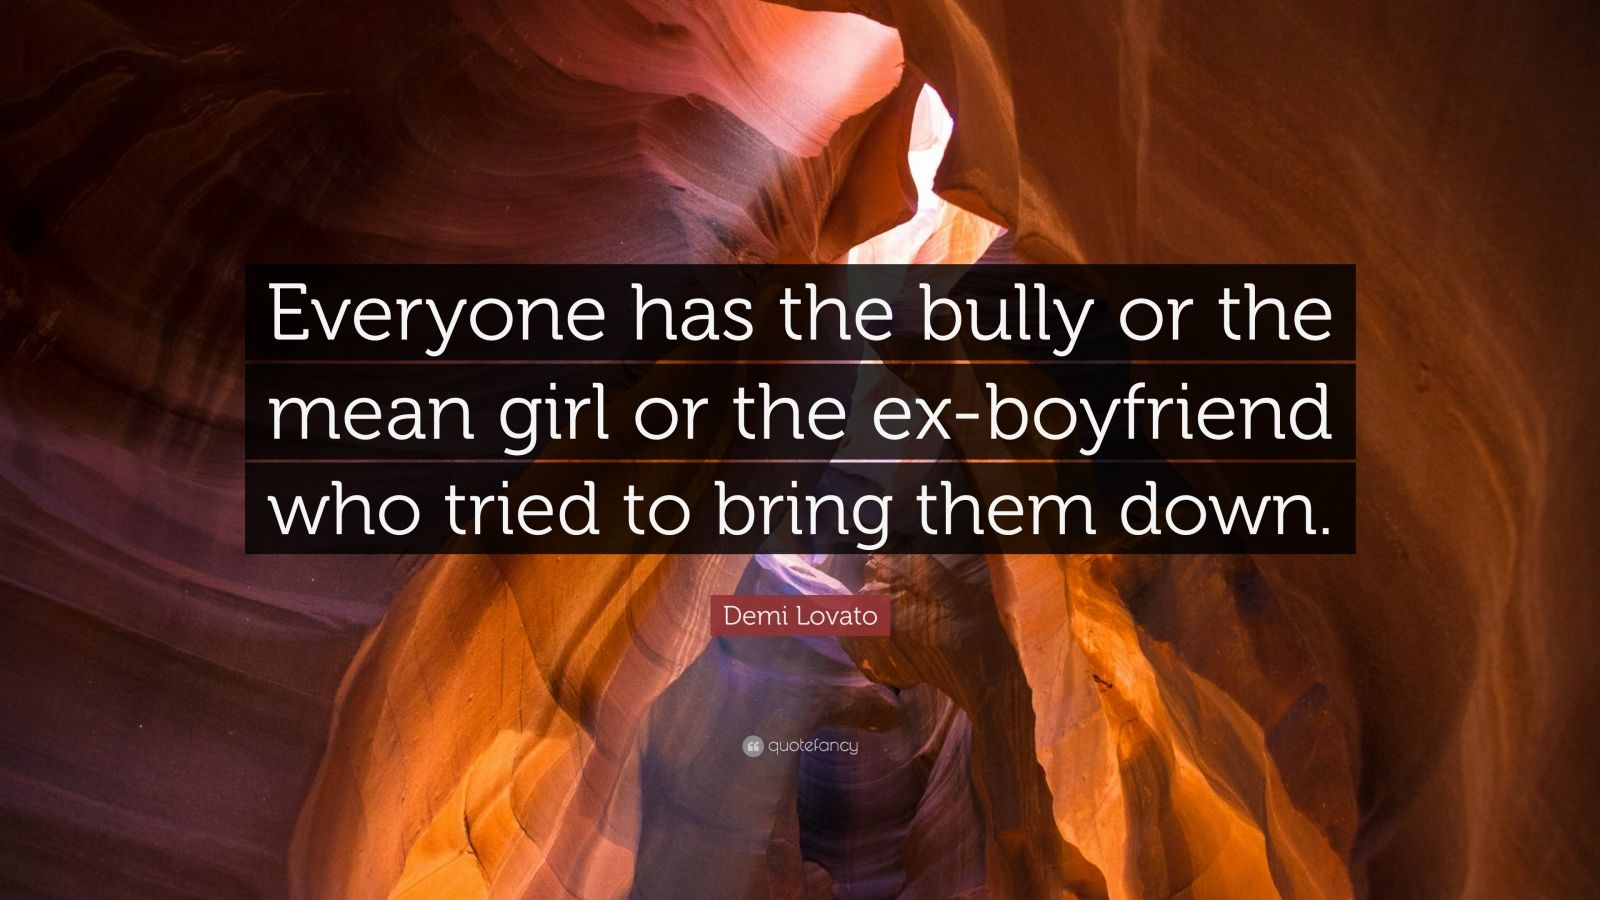 Top 40 Bullying Quotes 2021 Edition Free Images Quotefancy 